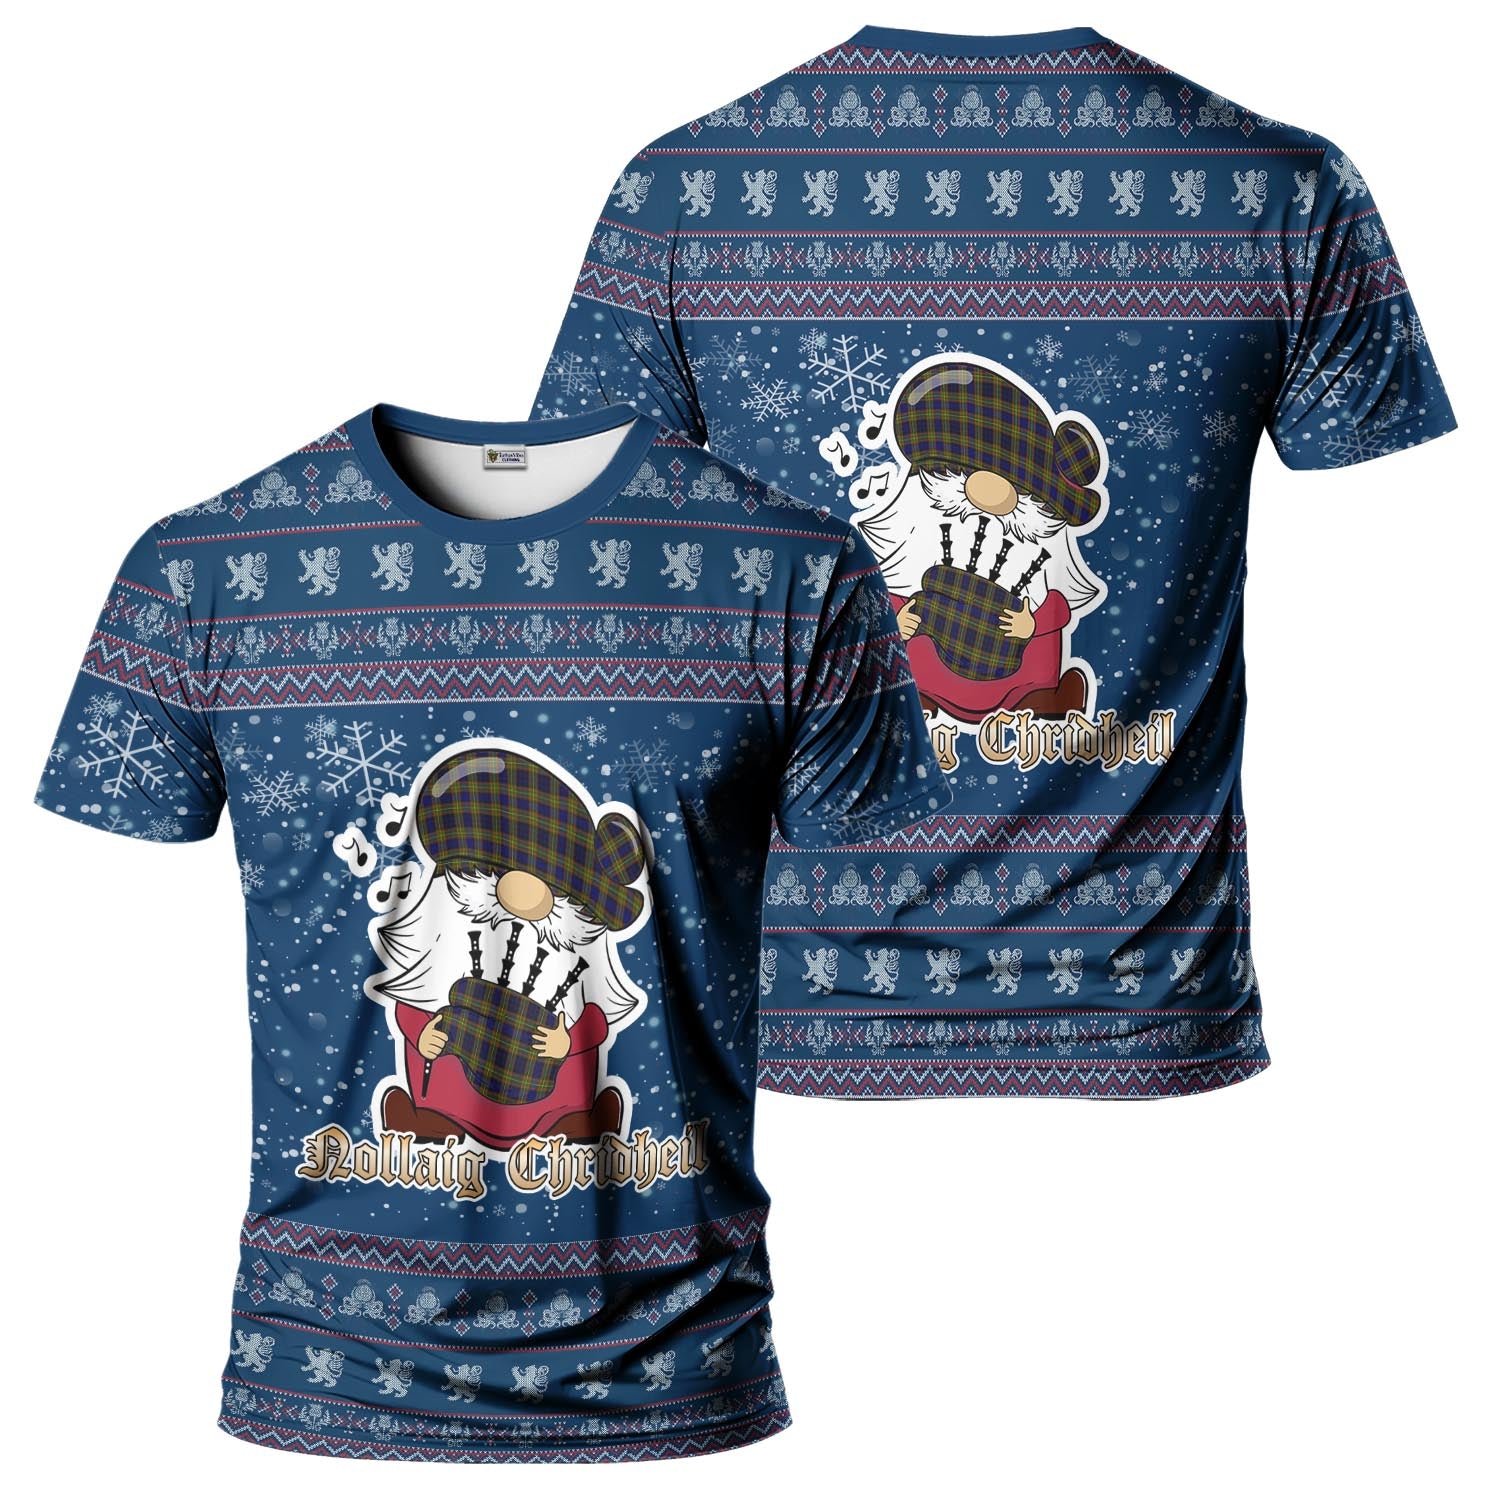 Clelland Modern Clan Christmas Family T-Shirt with Funny Gnome Playing Bagpipes Kid's Shirt Blue - Tartanvibesclothing